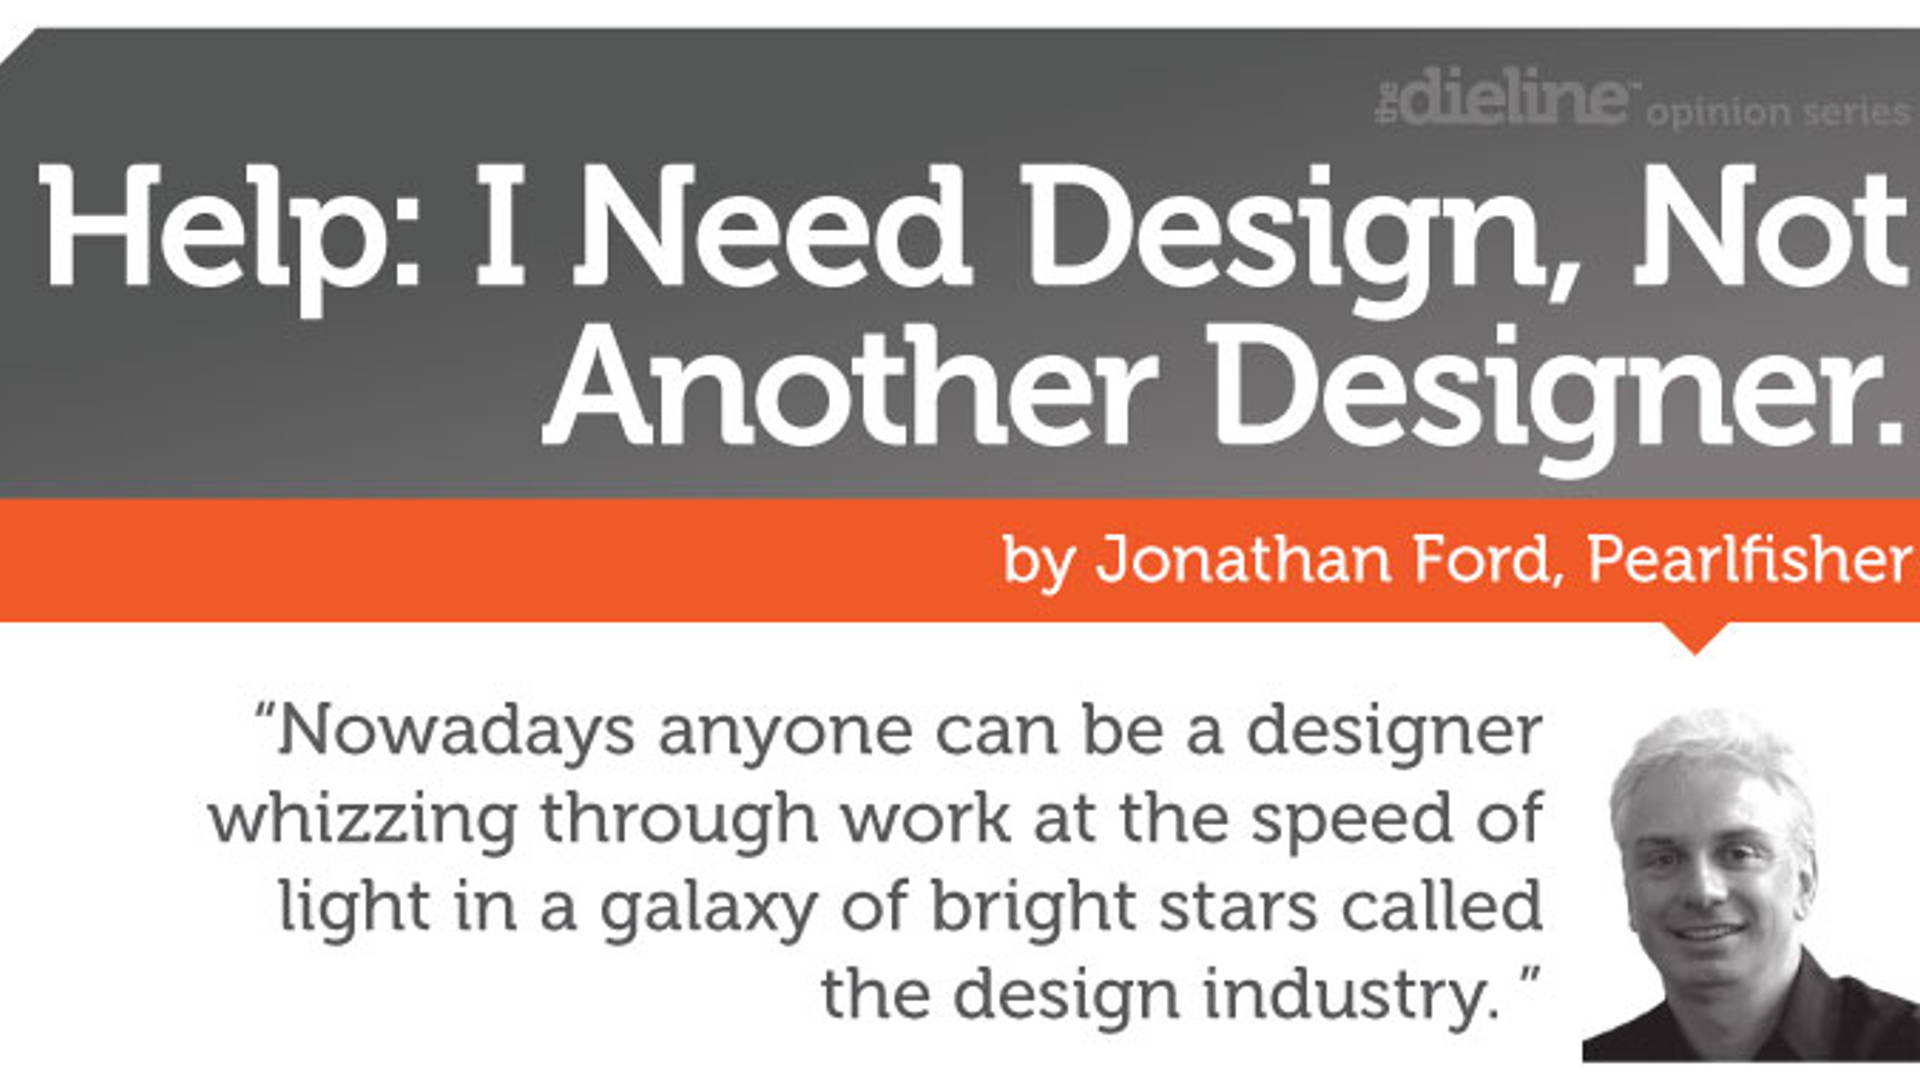 Featured image for Help: I Need Design, Not Another Designer.